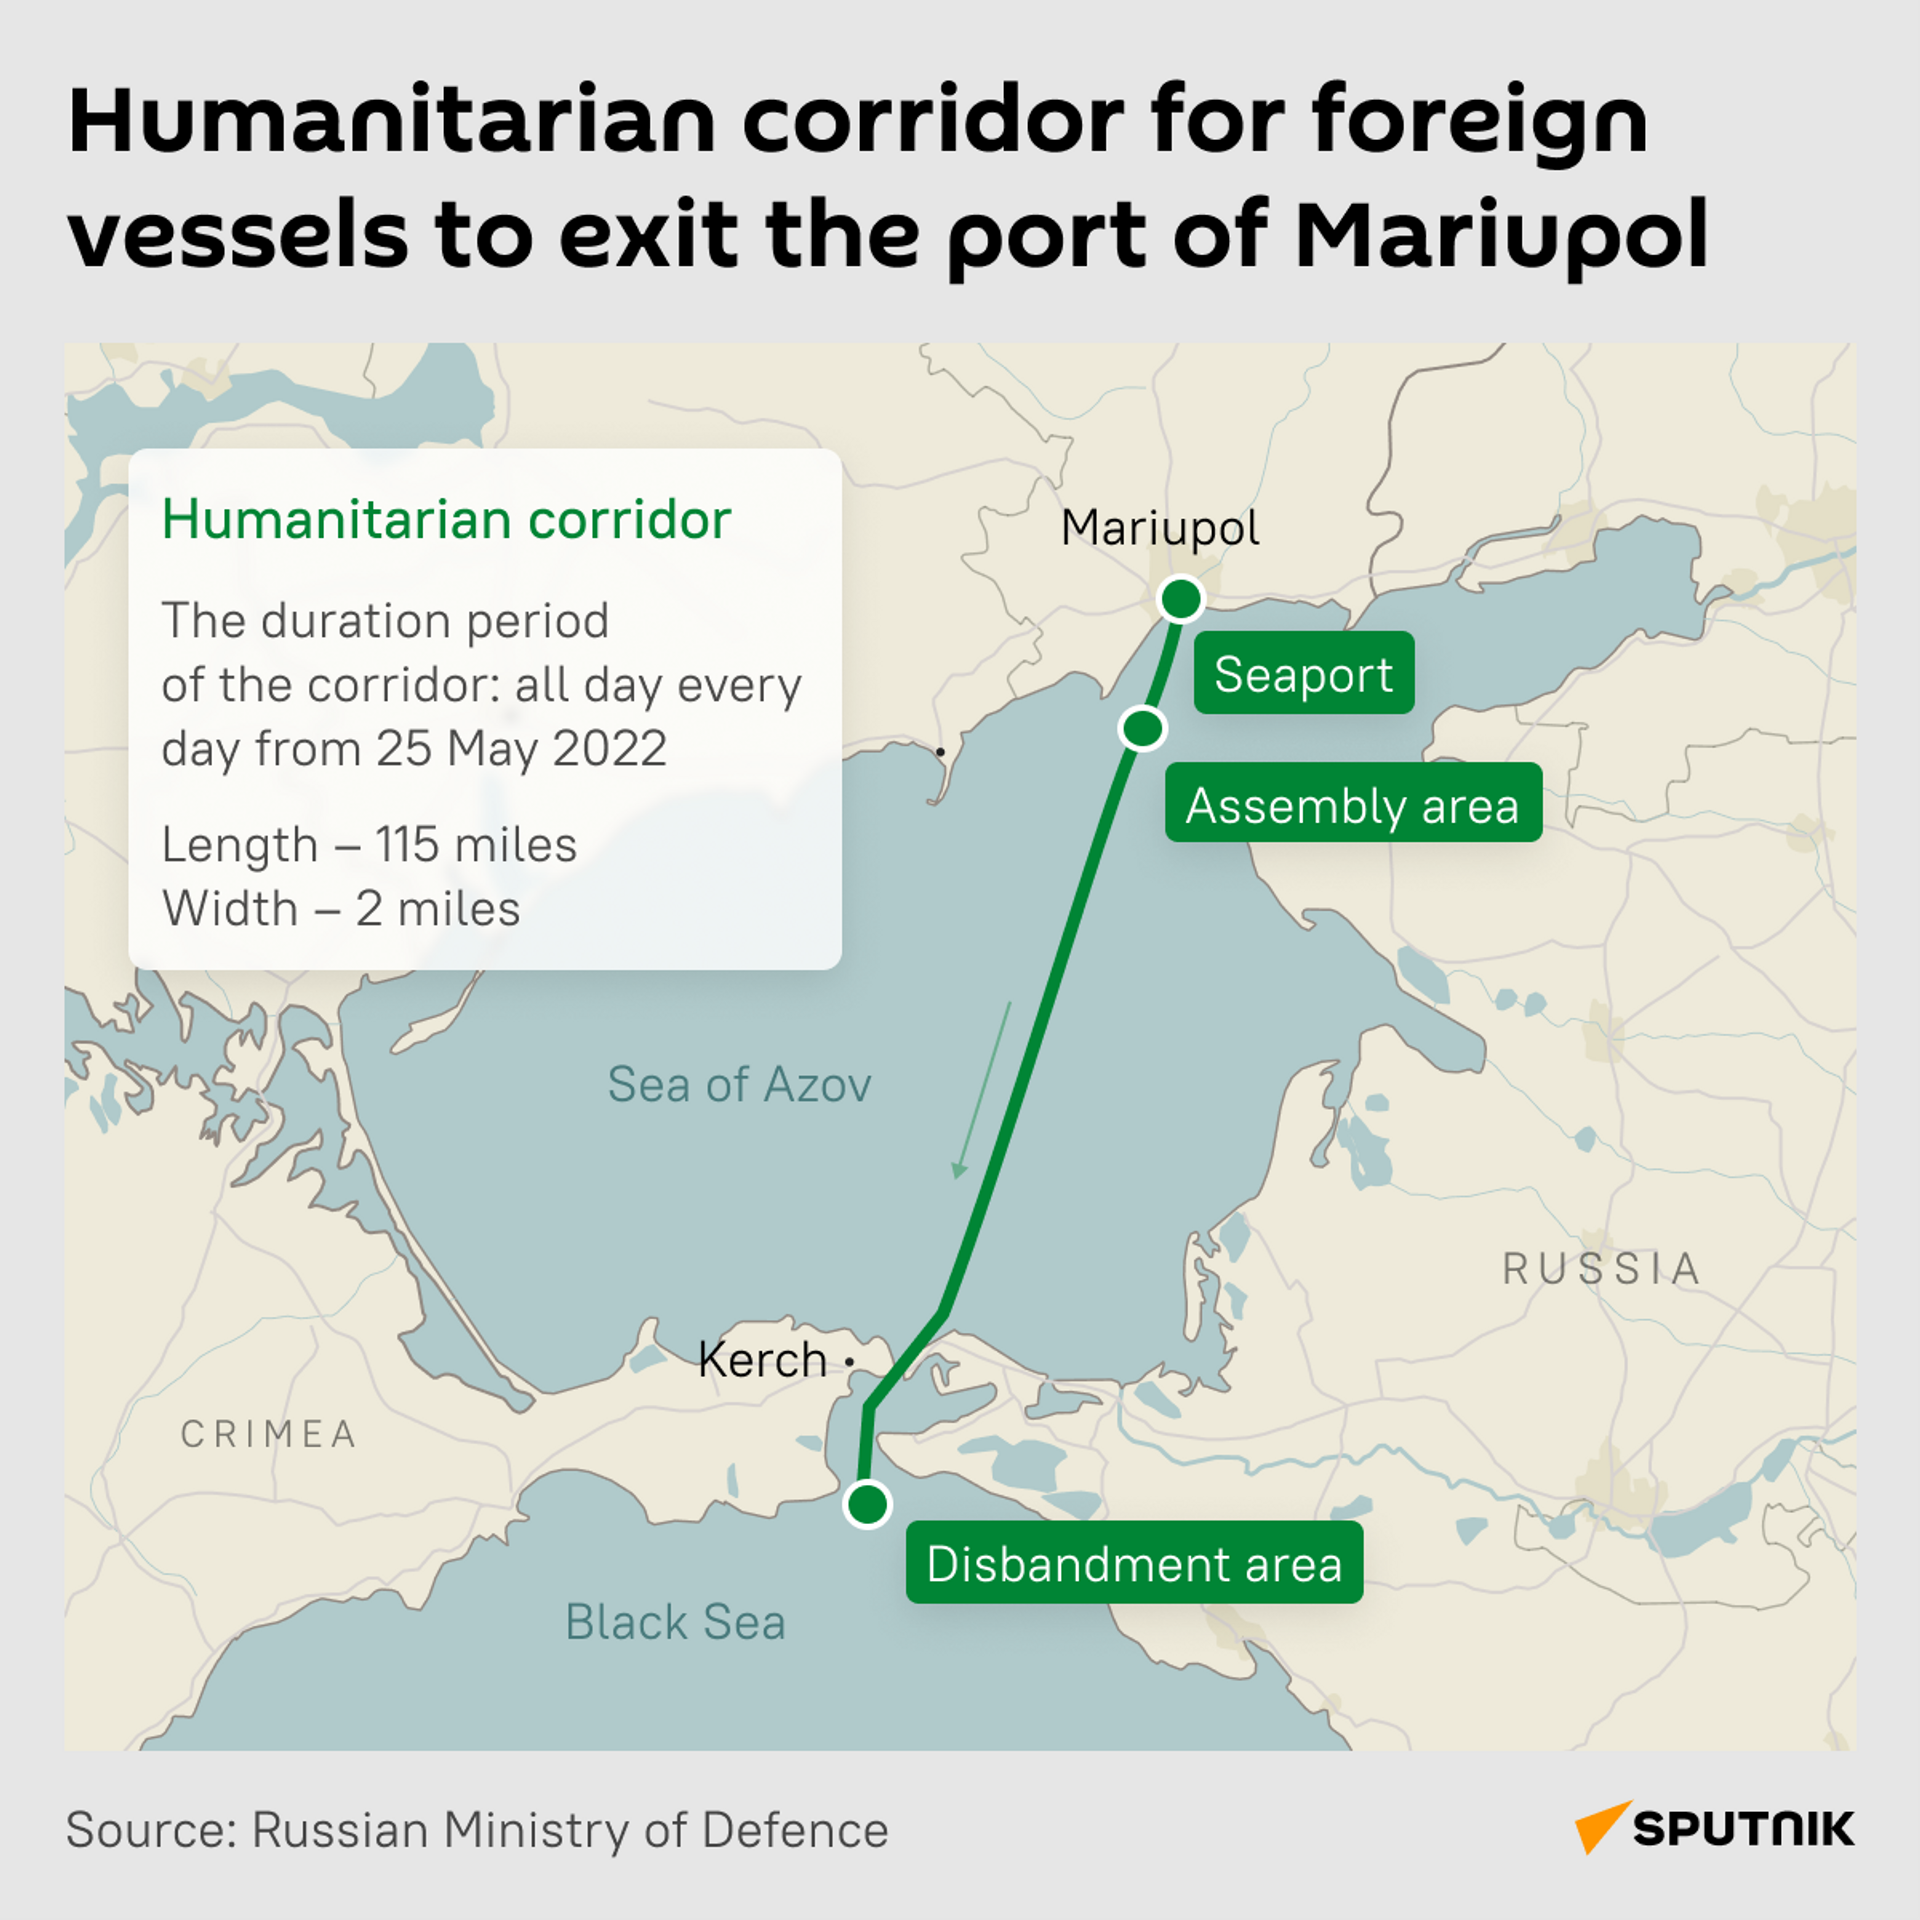 Humanitarian corridor for foreign vessels to exit the port of Mariupol - Sputnik International, 1920, 27.05.2022